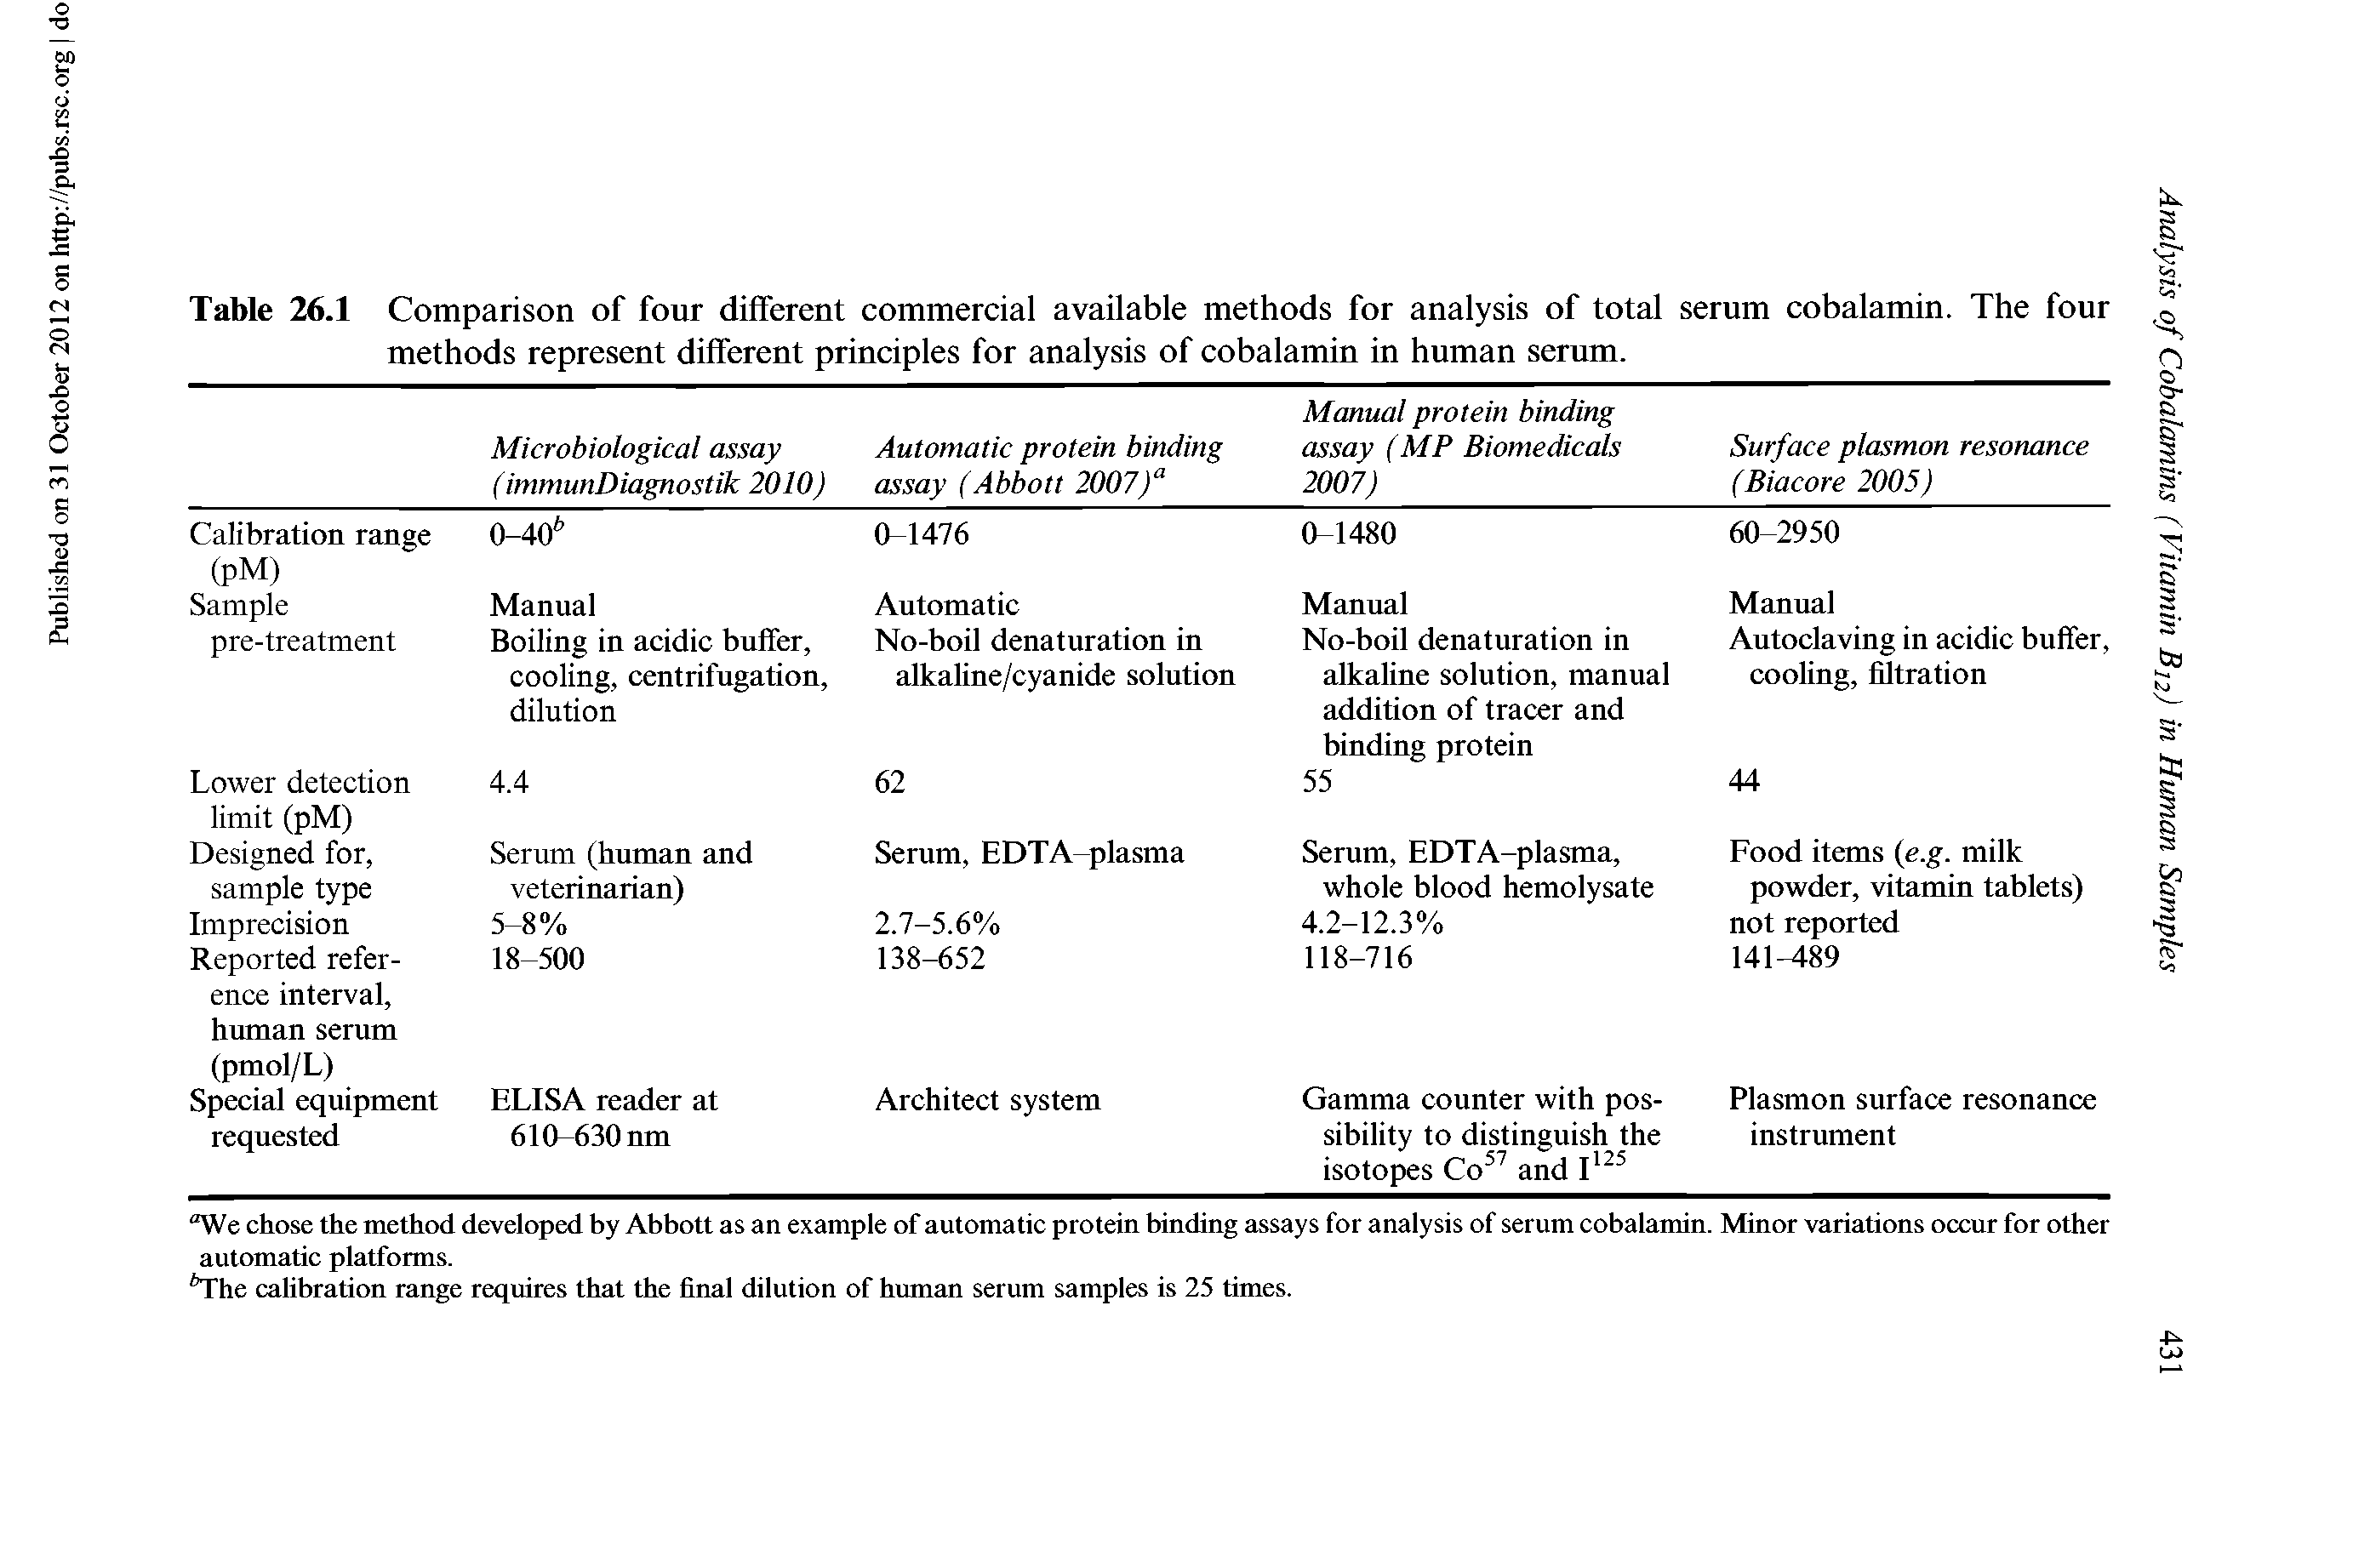 Table 26.1 Comparison of four different commercial available methods for analysis of total serum cobalamin. The four methods represent different principles for analysis of cobalamin in human serum.